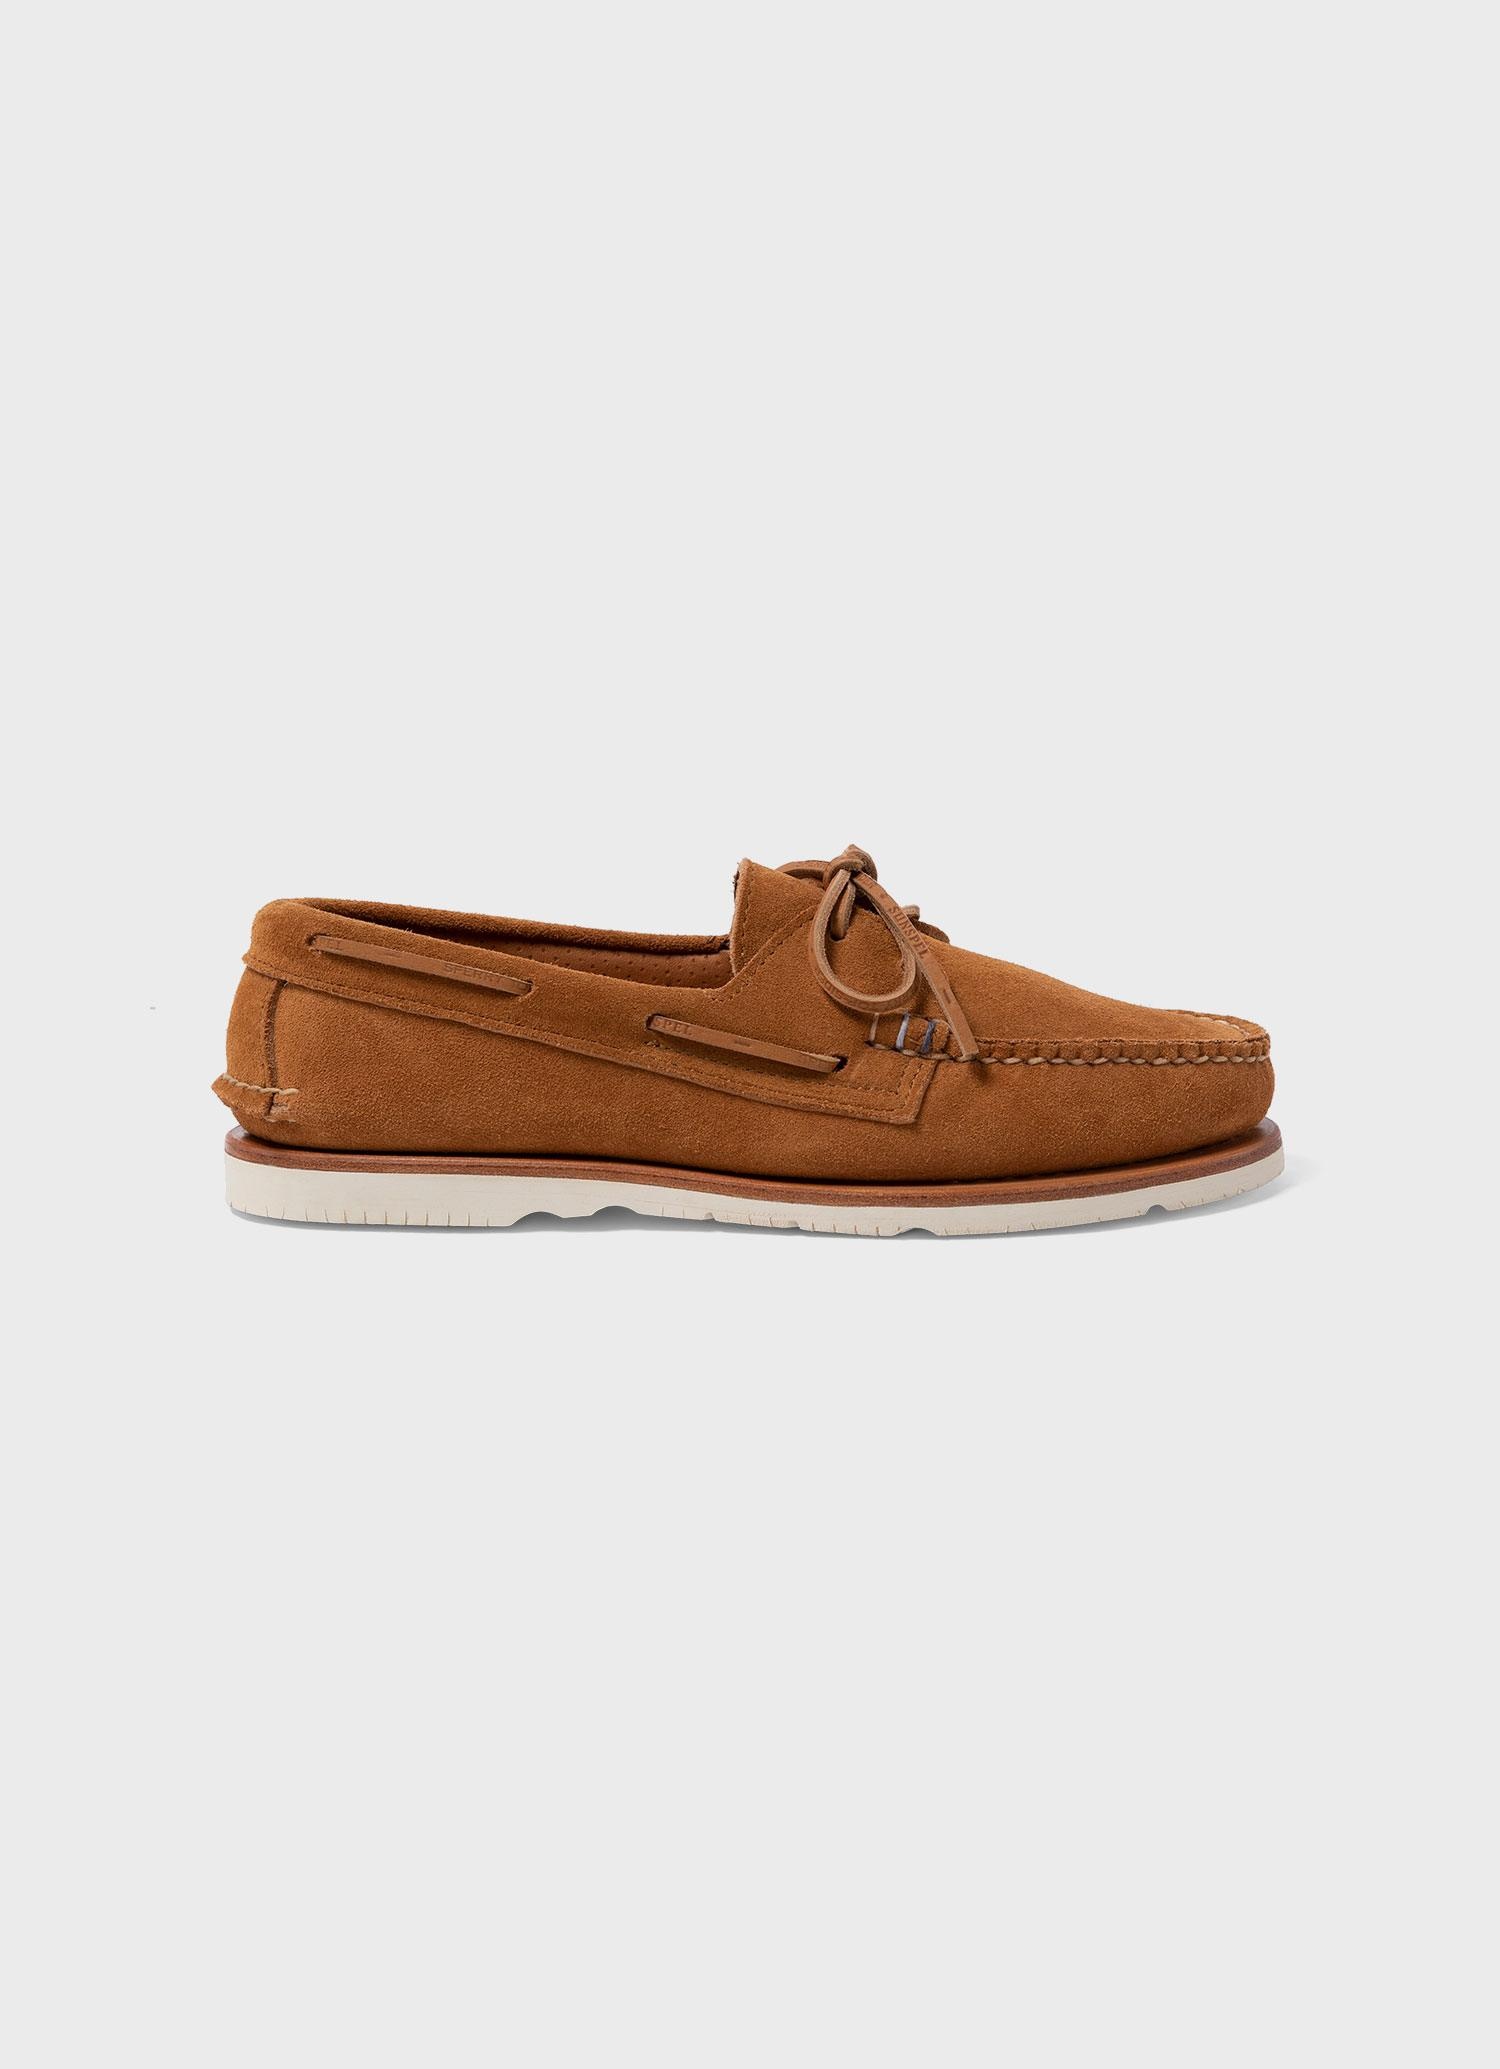 Sunspel and Sperry Suede Boat Shoe - 1